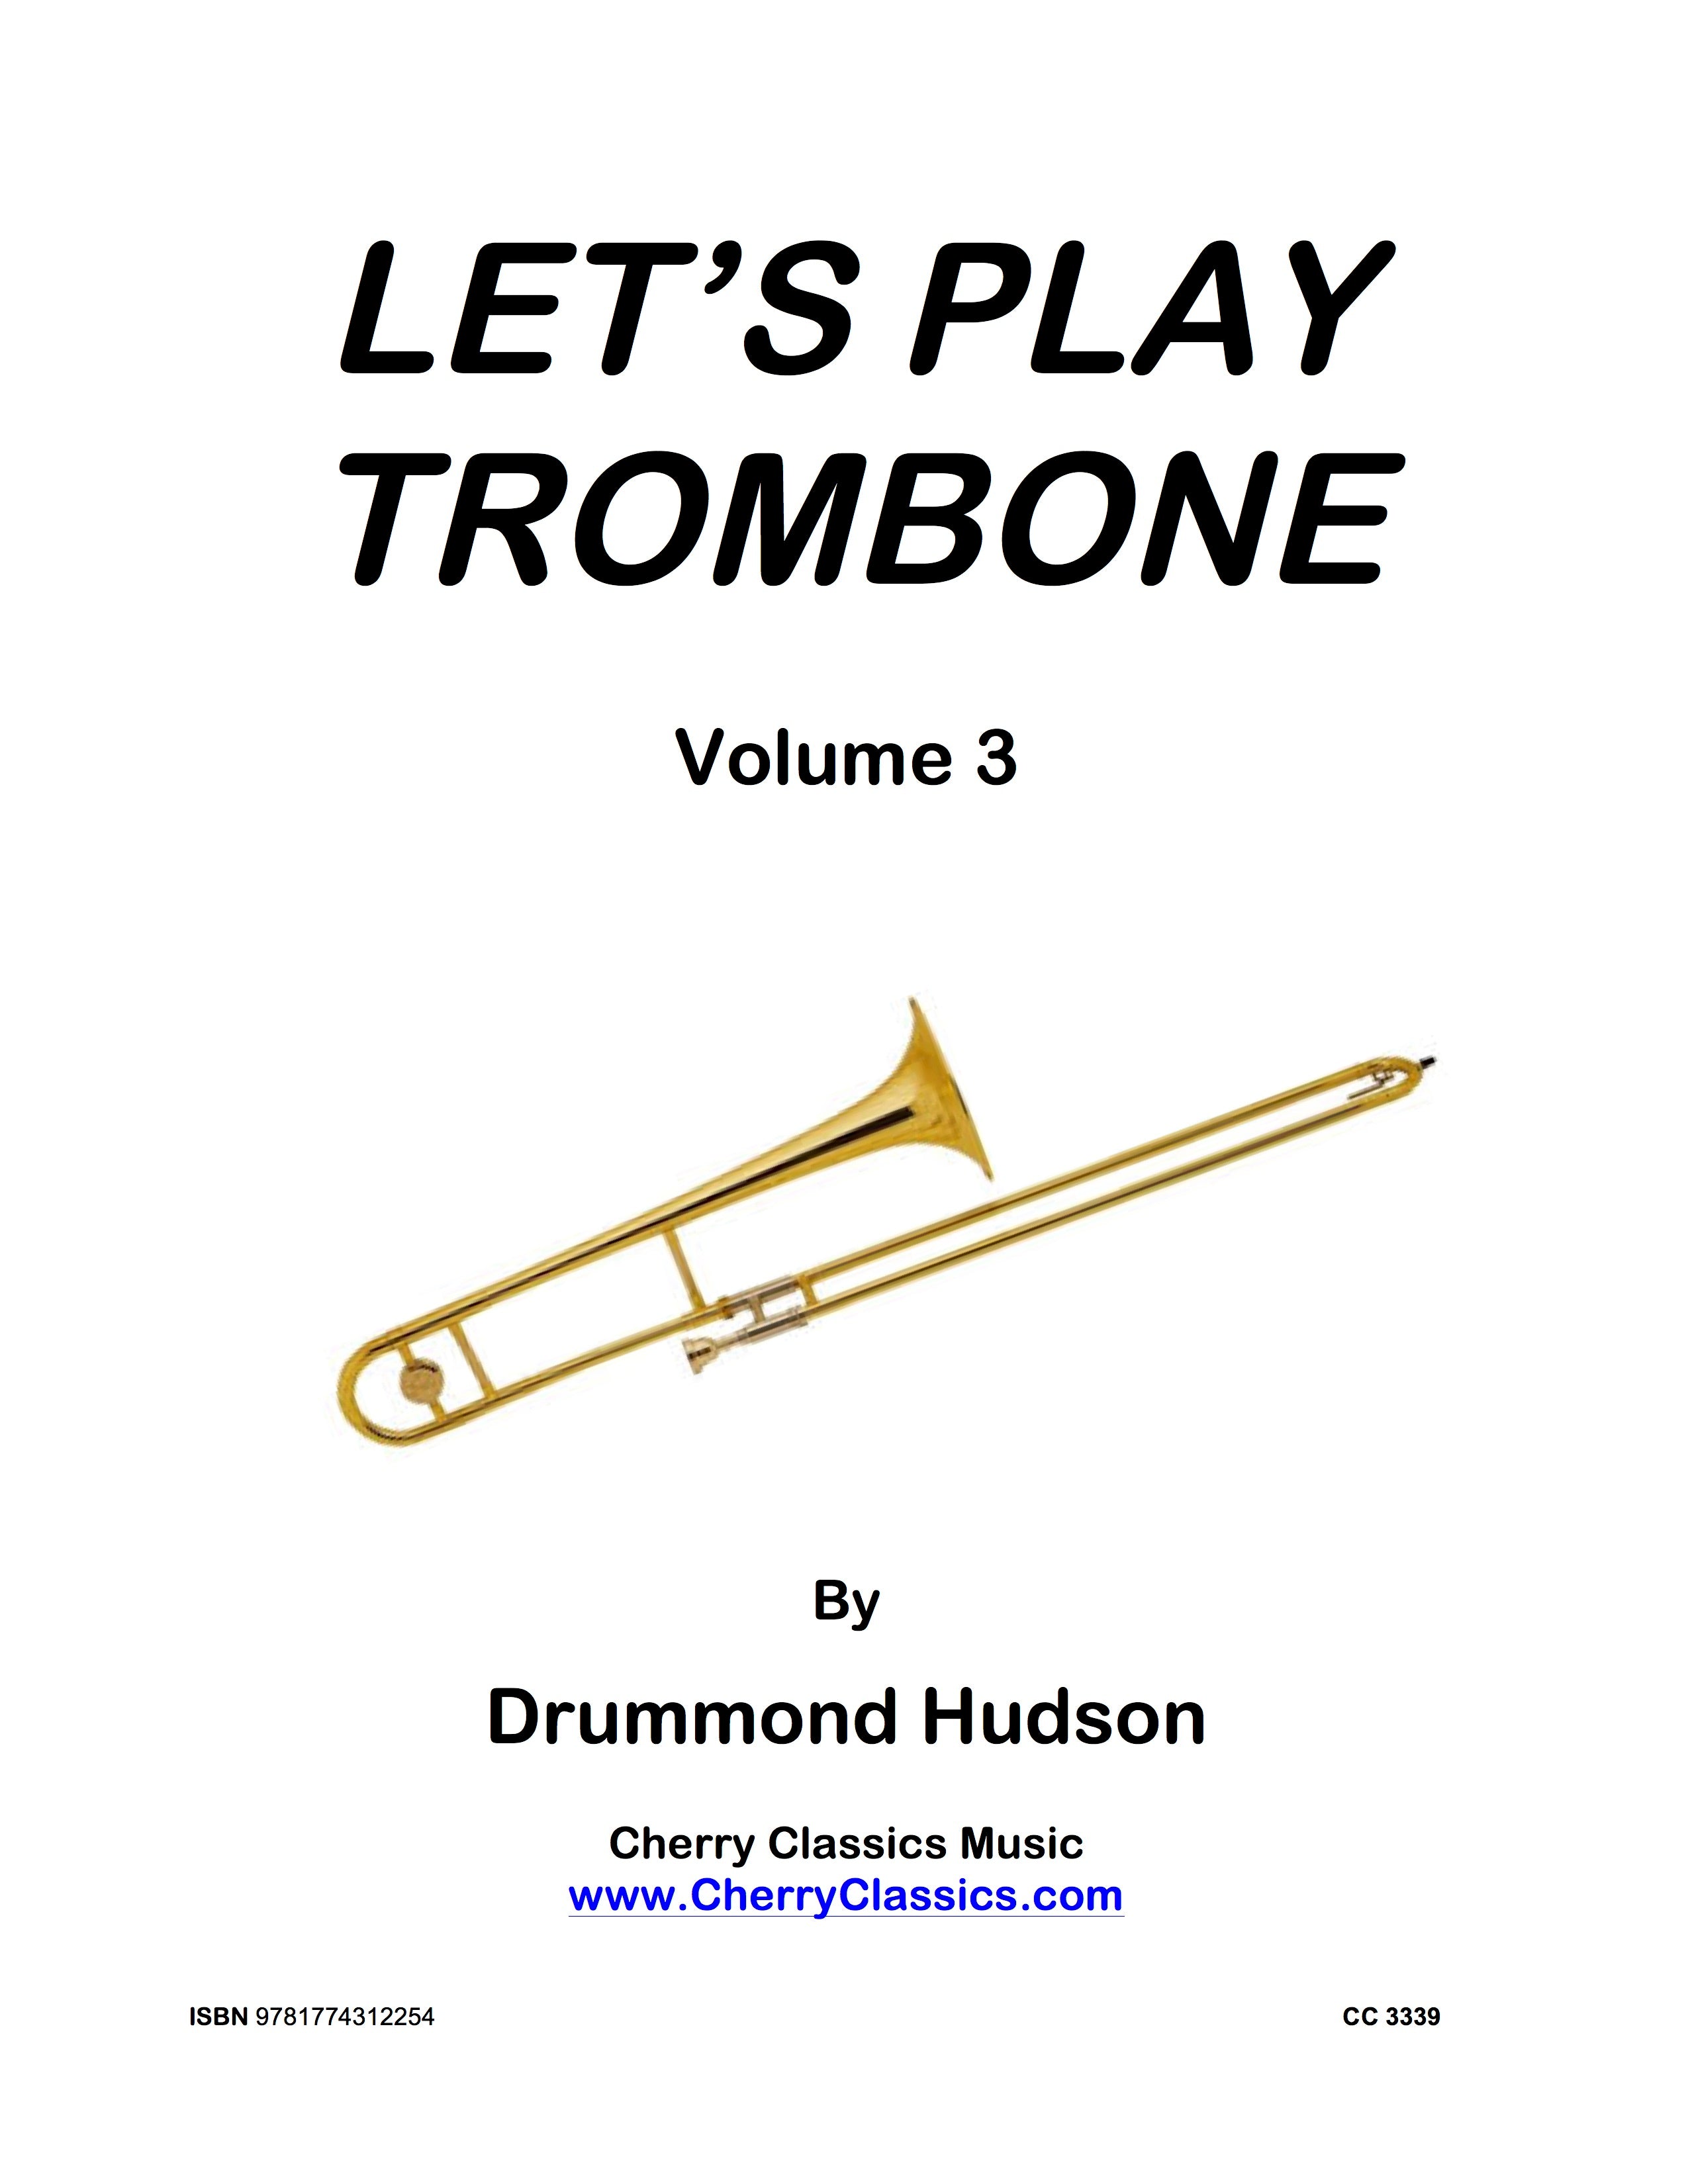 Trombone: How to Play a B-flat Major Scale 